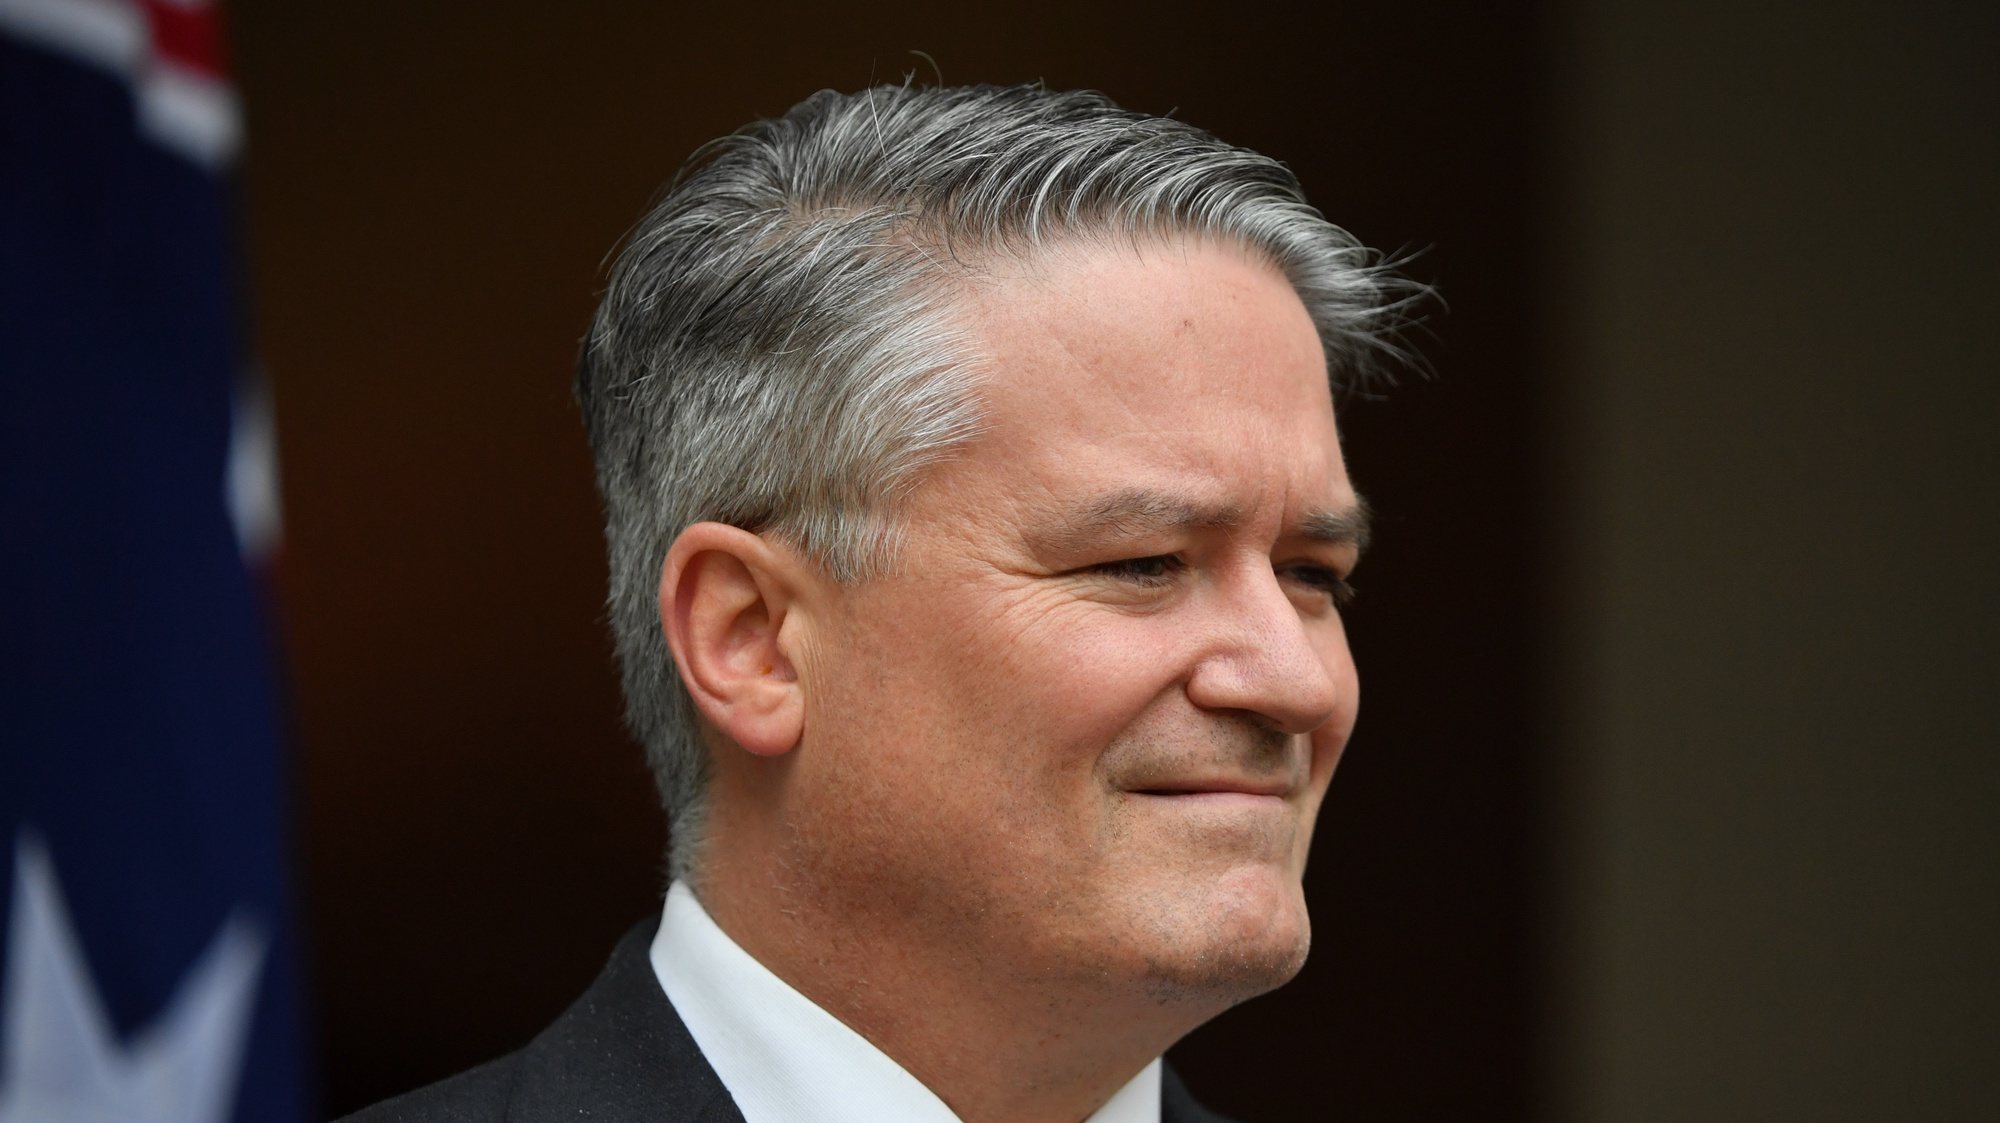 epa08730873 Minister for Finance Mathias Cormann looks on during a press conference at Parliament House in Canberra, Australia, 09 October 2020. During the press conference, Australian Prime Minister Scott Morrison discussed the passage of tax relief and general changes to the tax code in the Senate. The measures are designed to aleviate economic disruptions incured to individuals and business during the COVID-19 disease pandemic.  EPA/MICK TSIKAS AUSTRALIA AND NEW ZEALAND OUT